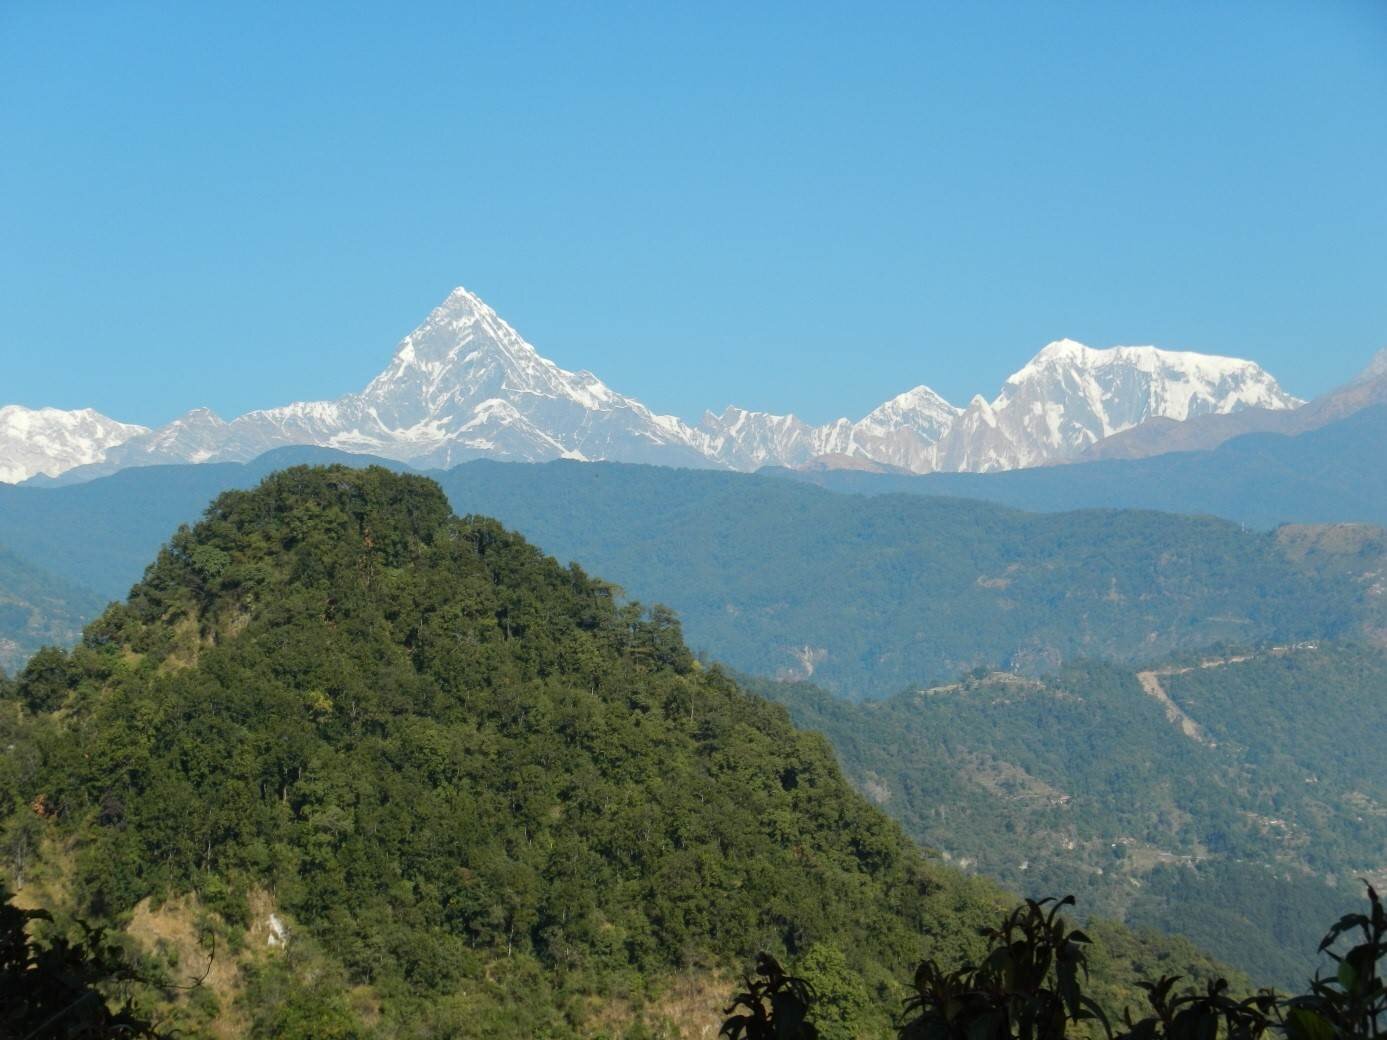 Erosion of the Himalayas governed by tectonic movements, limiting climate change impacts on landscape formation - Phys.org